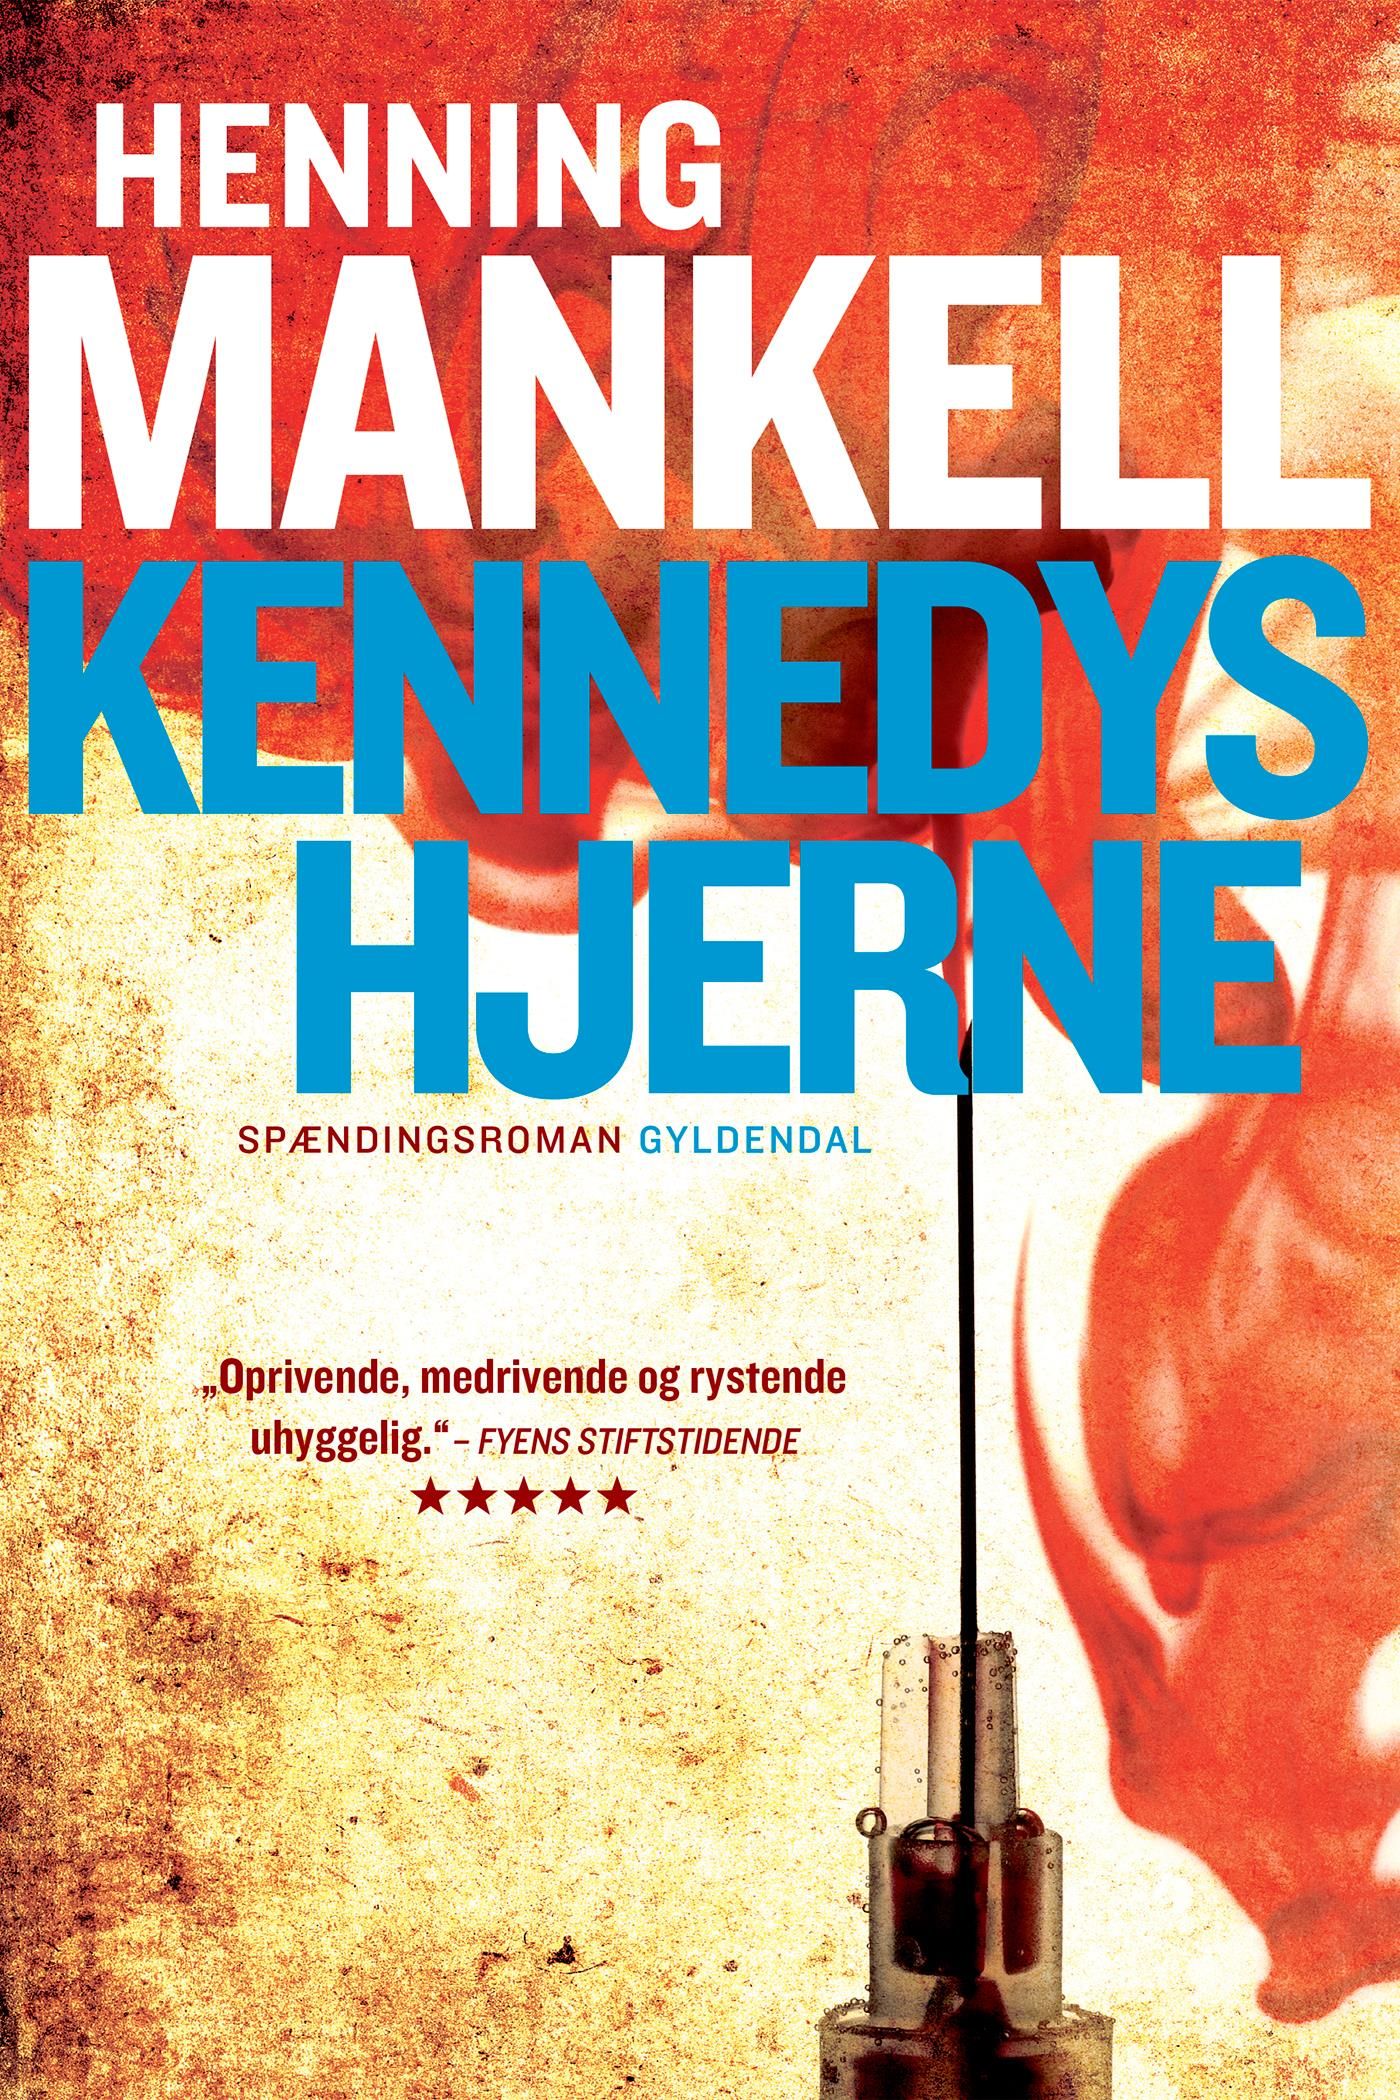 Kennedys hjerne, eBook by Henning Mankell